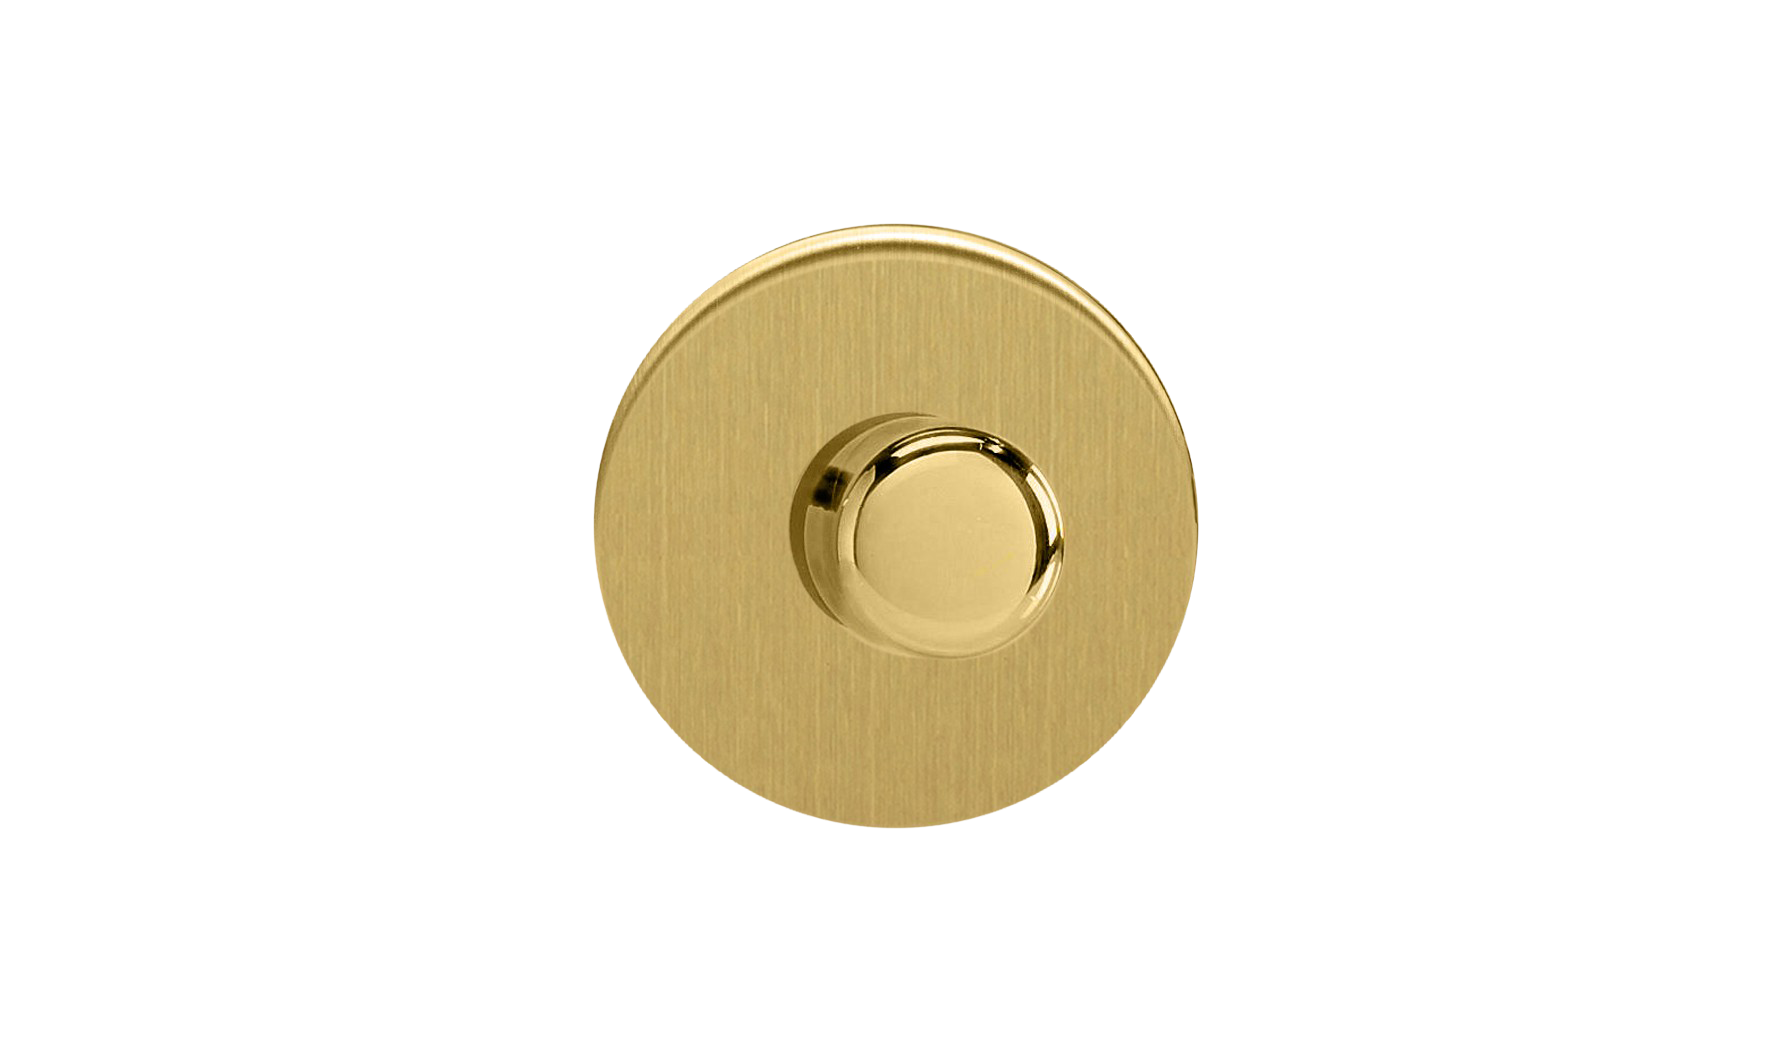 Universal Dimmer - Brushed Brass